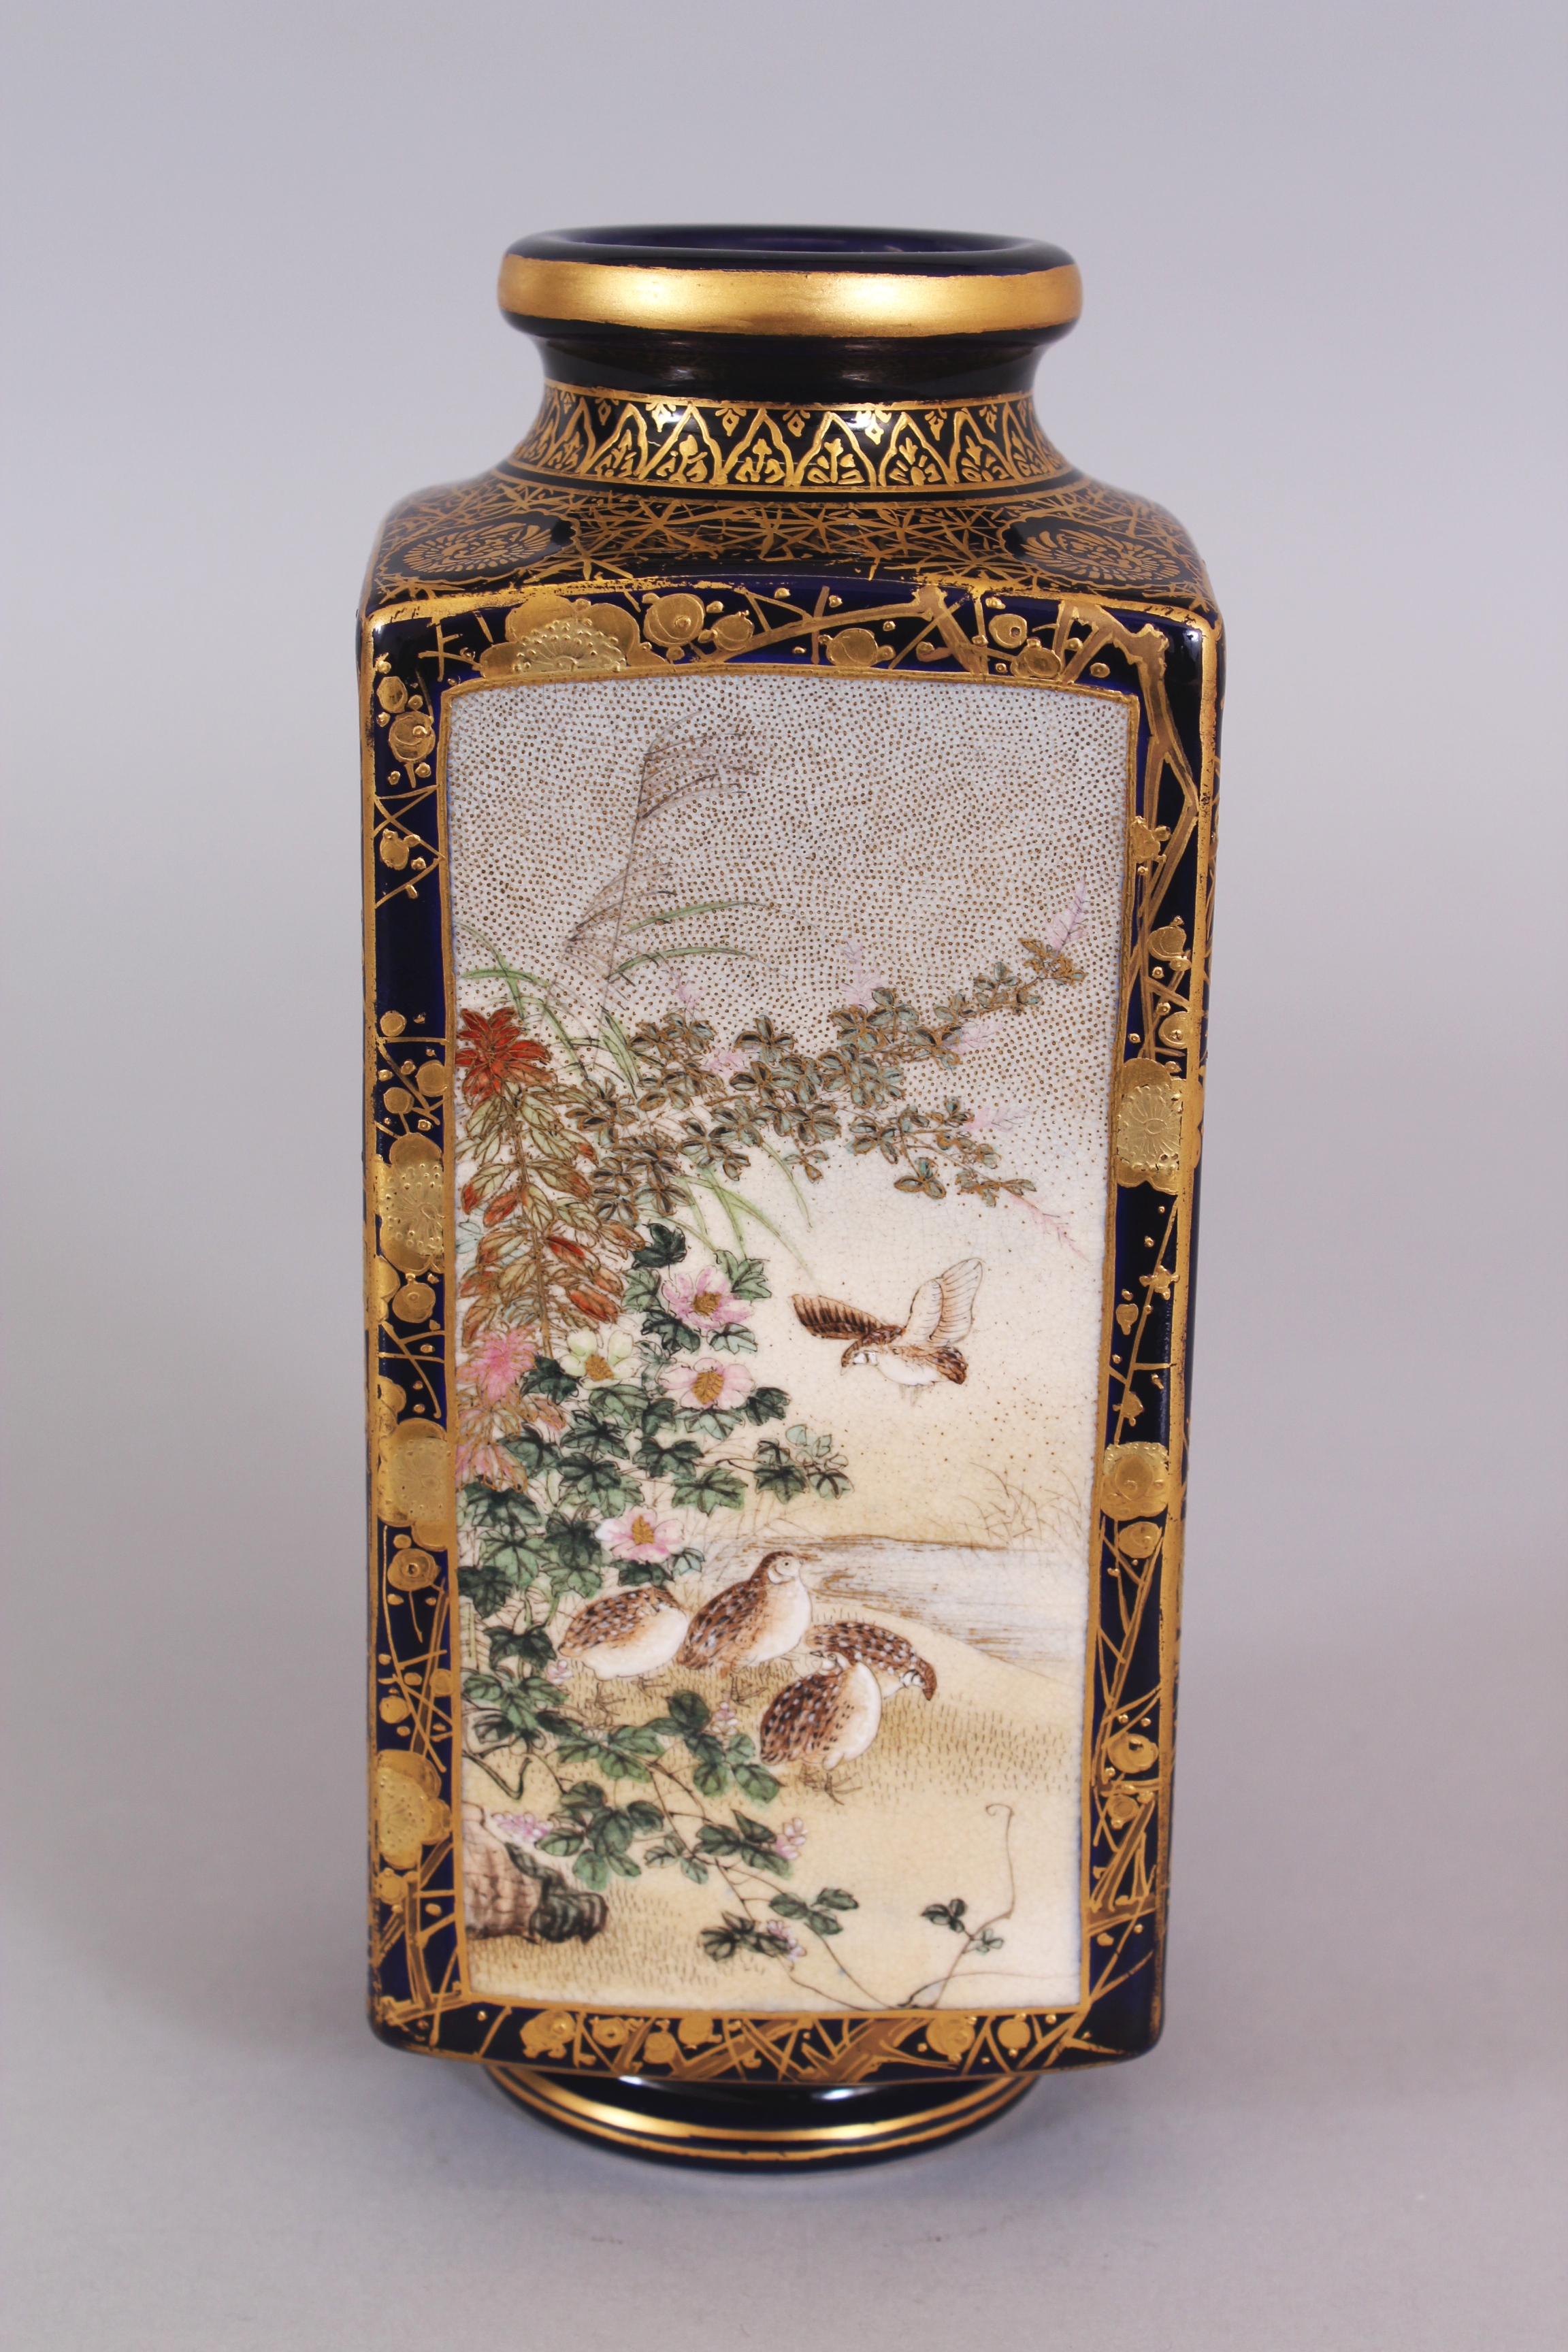 A GOOD QUALITY SIGNED JAPANESE MEIJI PERIOD SATSUMA SQUARE SECTION EARTHENWARE VASE, well painted - Image 2 of 10